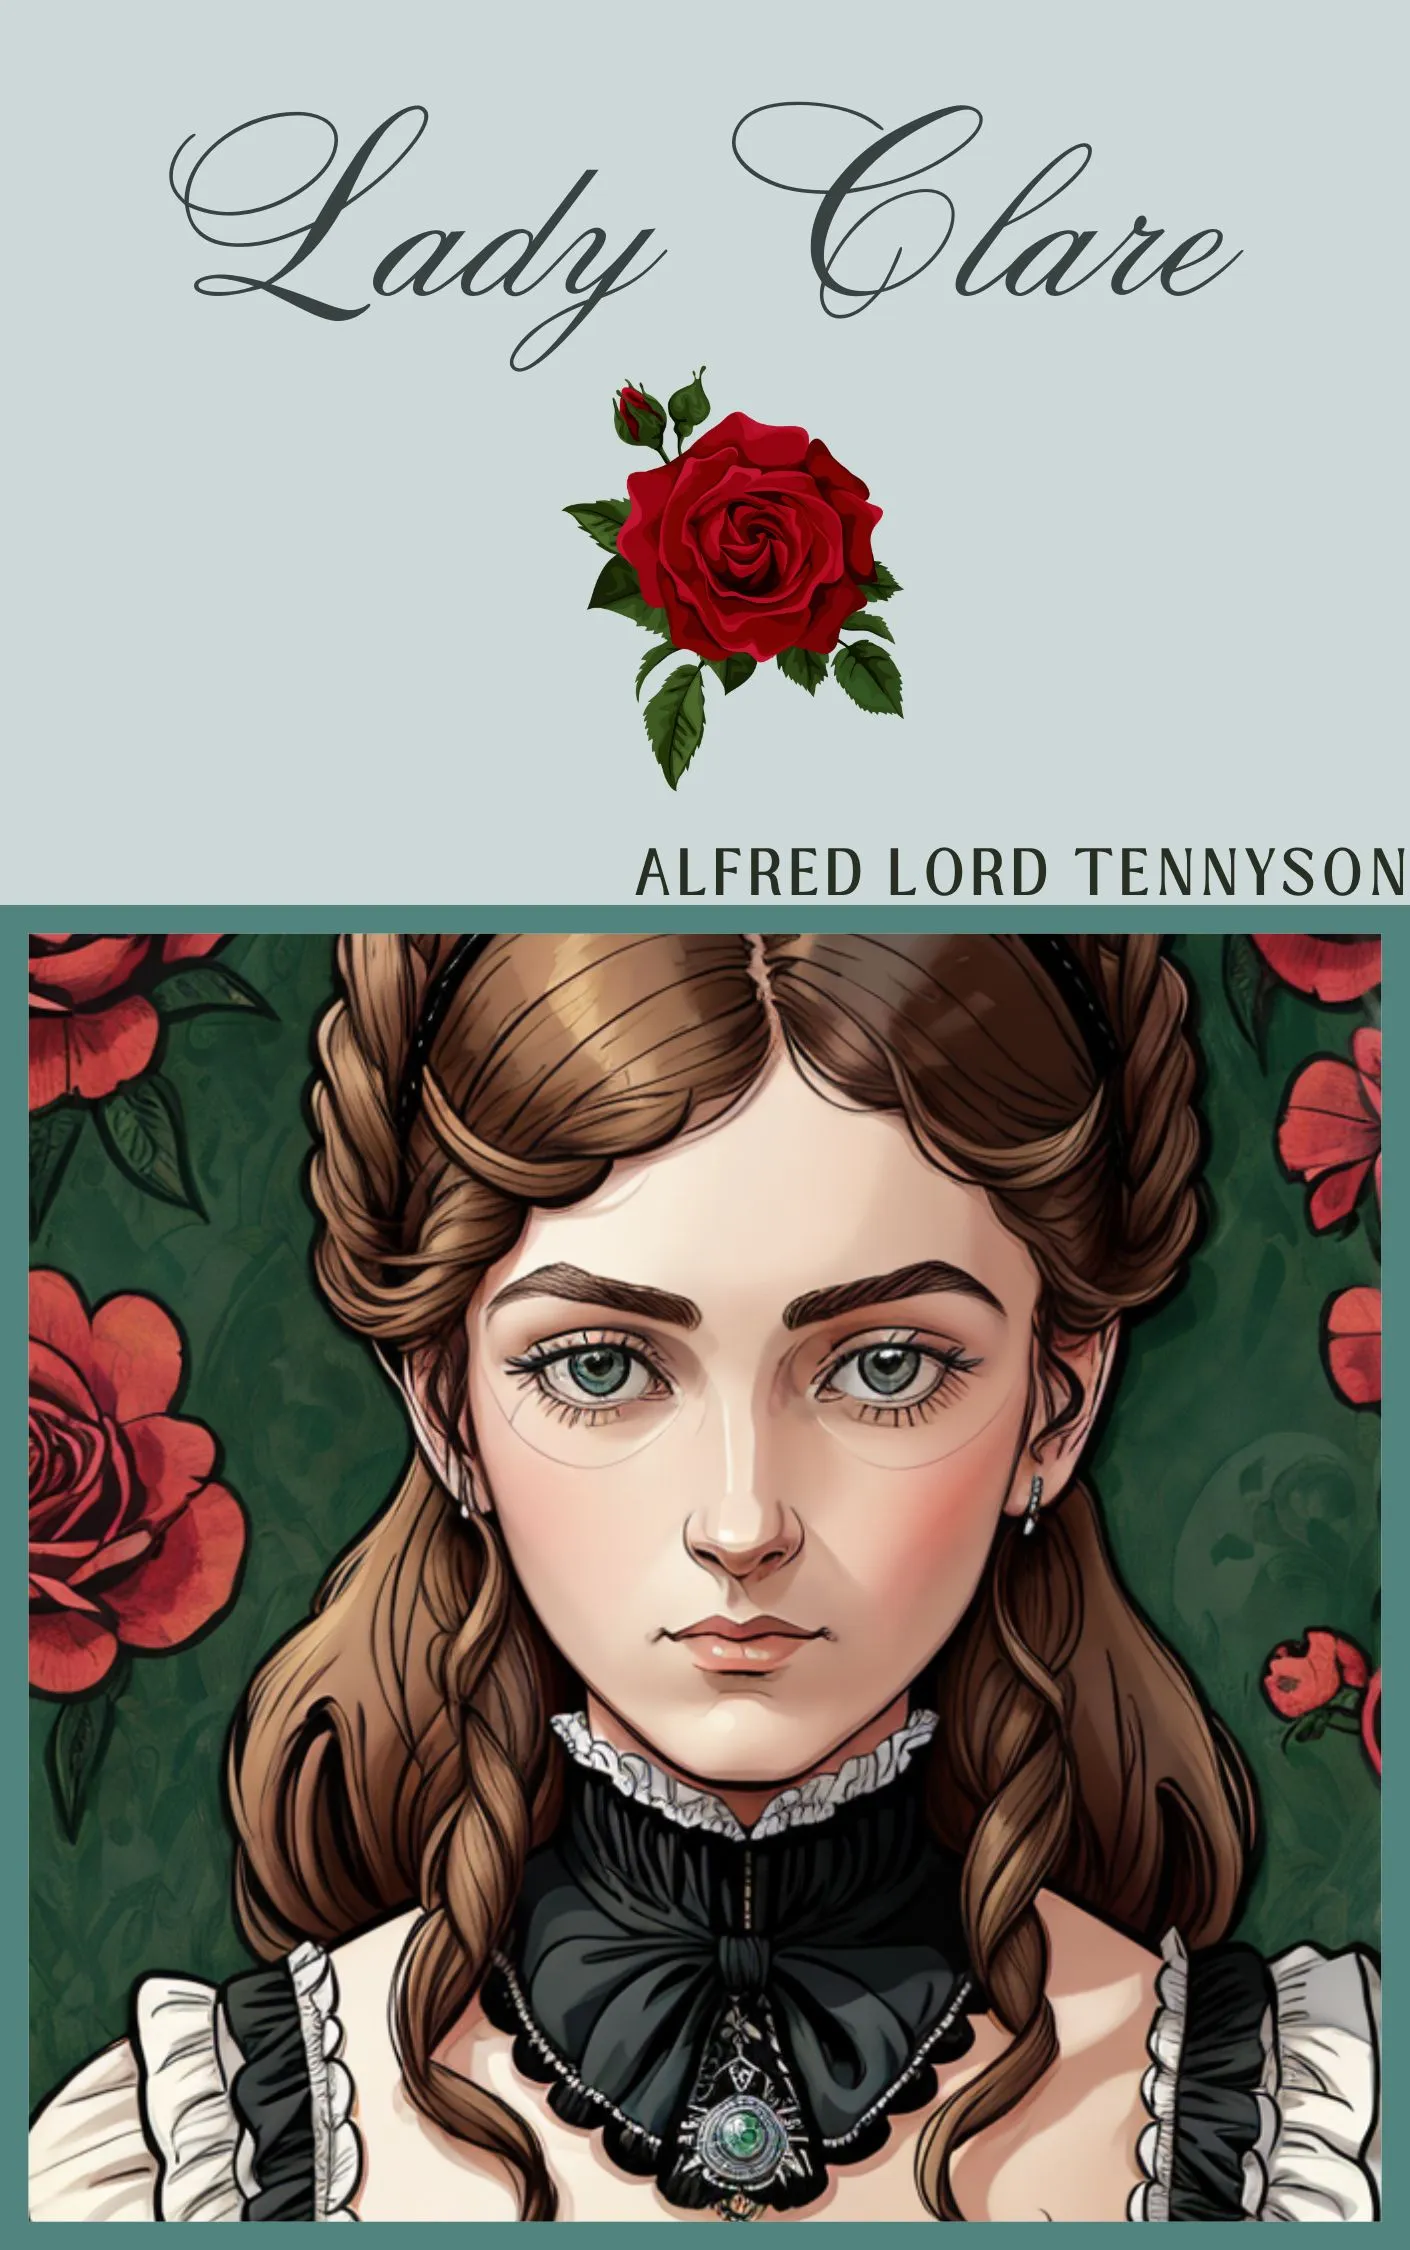 Lady Clare Audiobook by Alfred Lord Tennyson